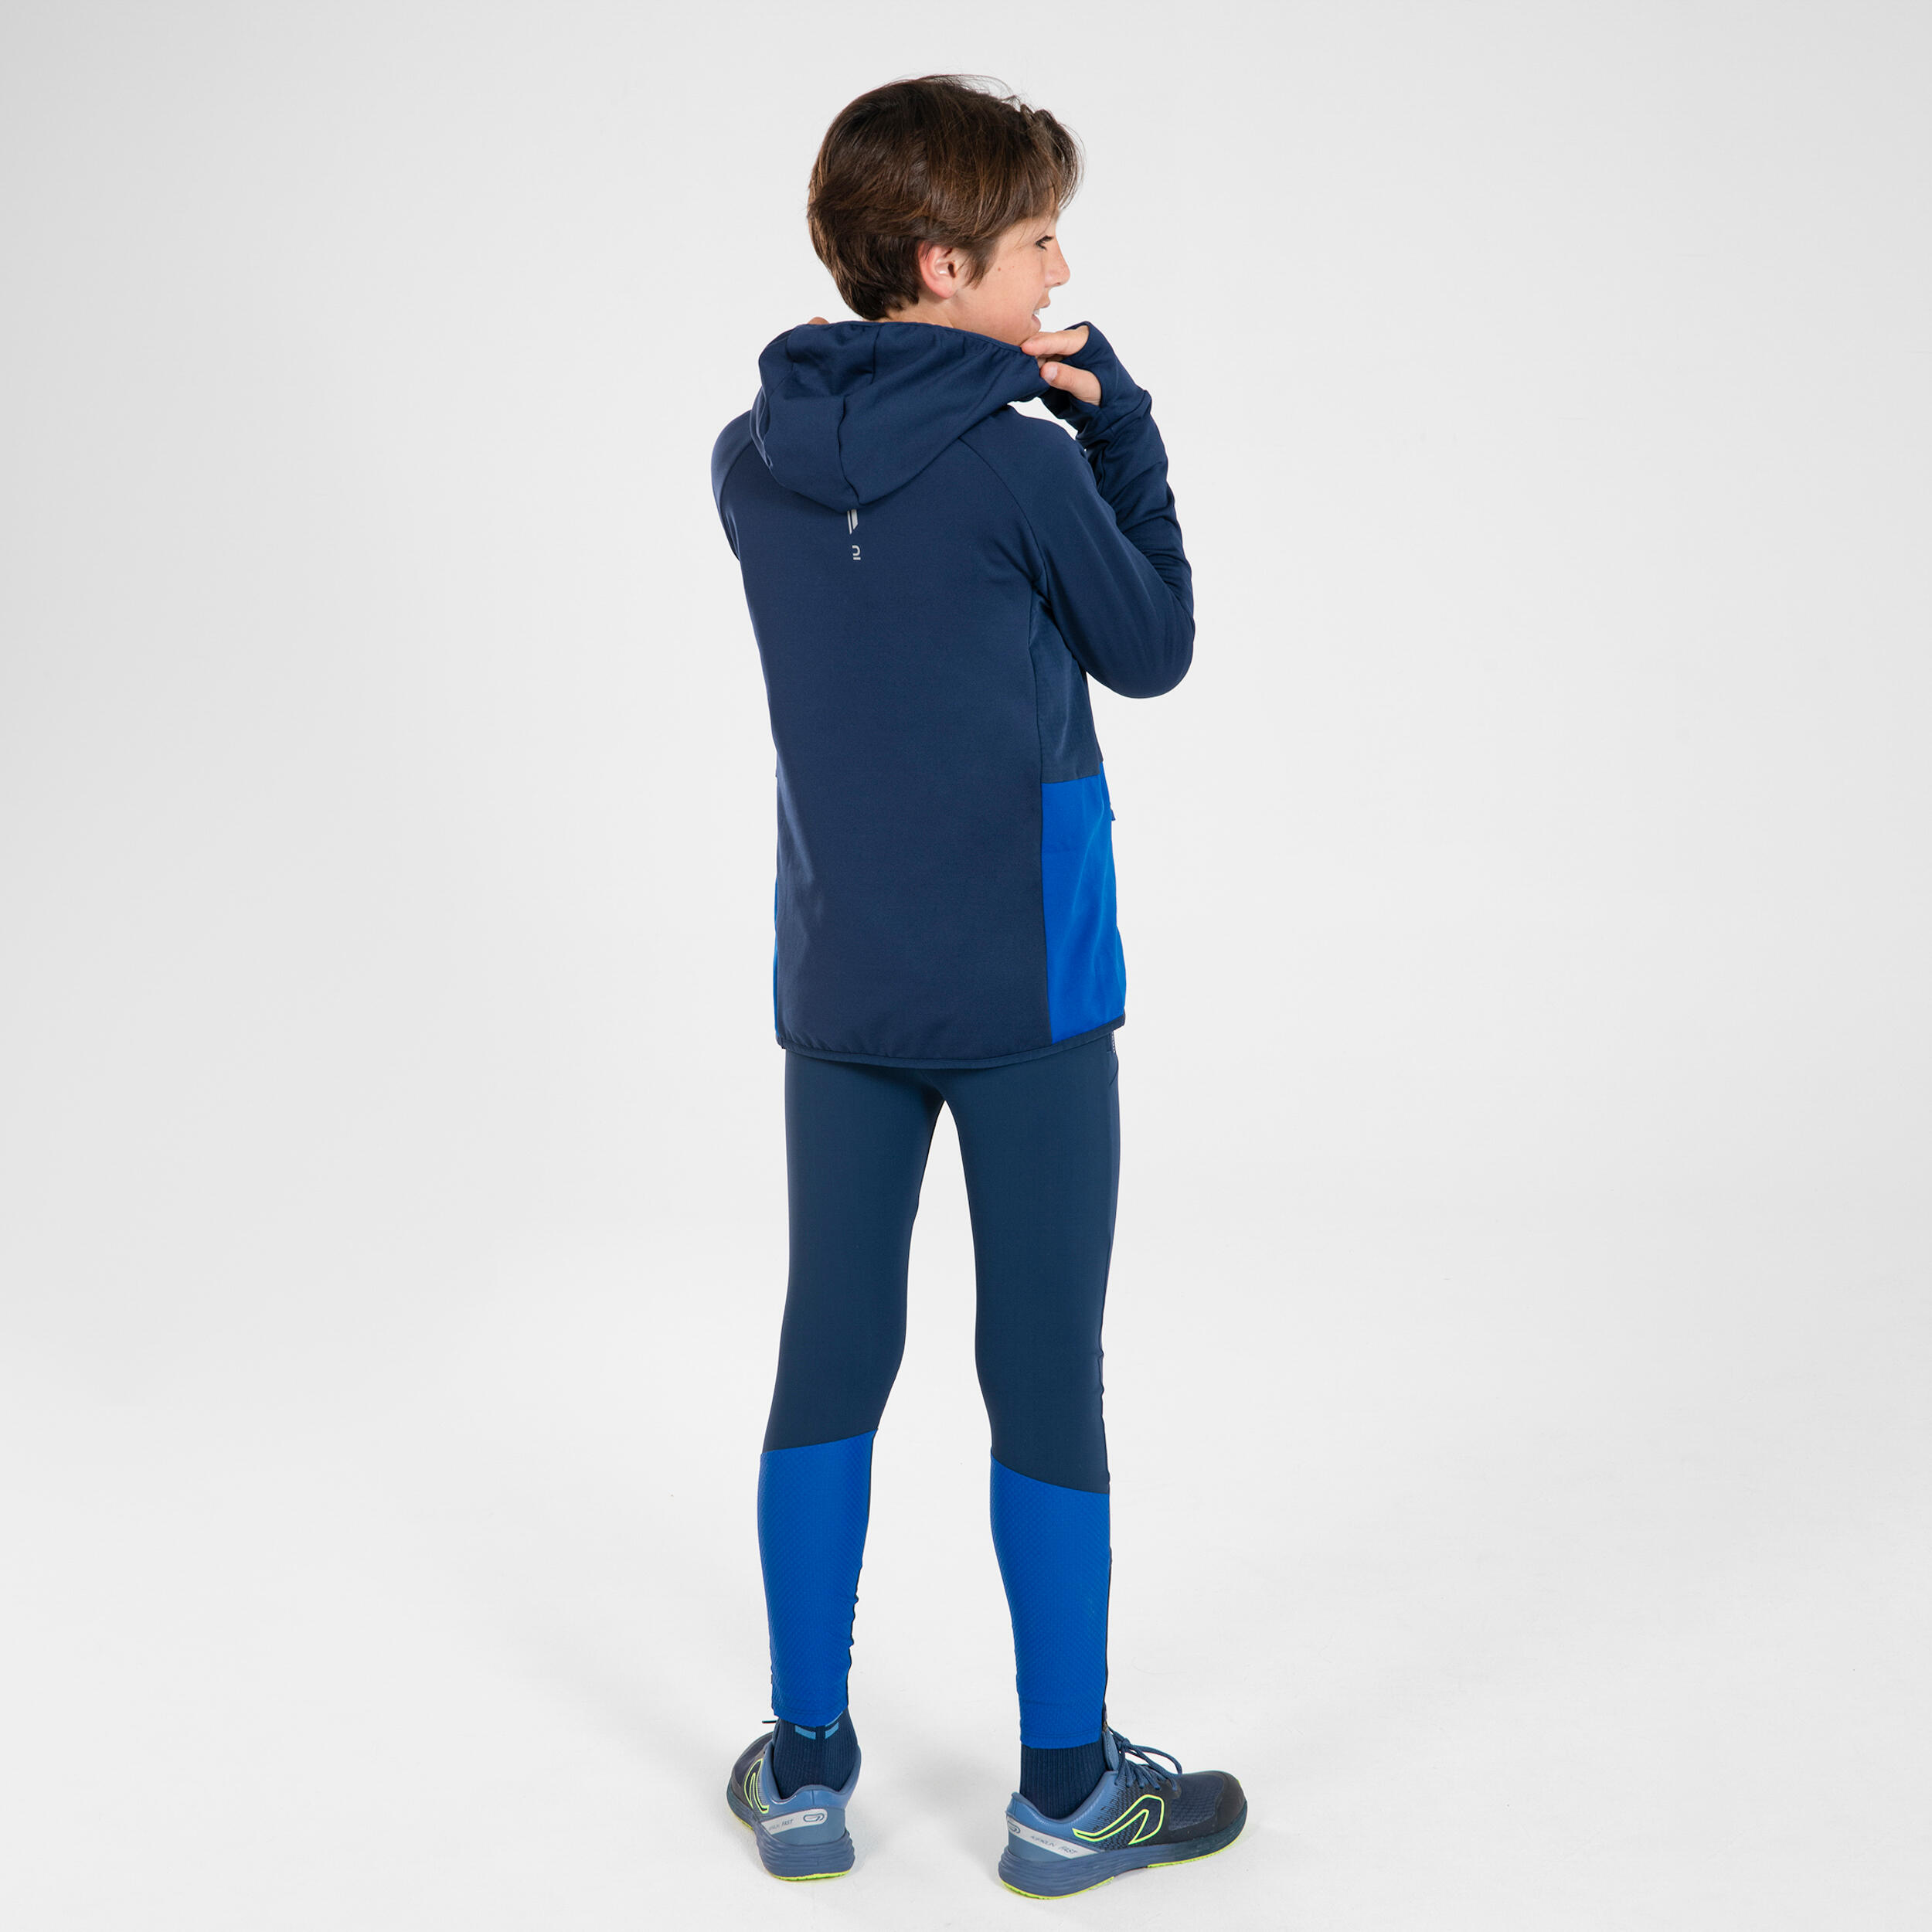 KIDS' RUNNING TIGHTS - KIPRUN DRY+ NAVY BLUE AND ELECTRIC BLUE 4/13